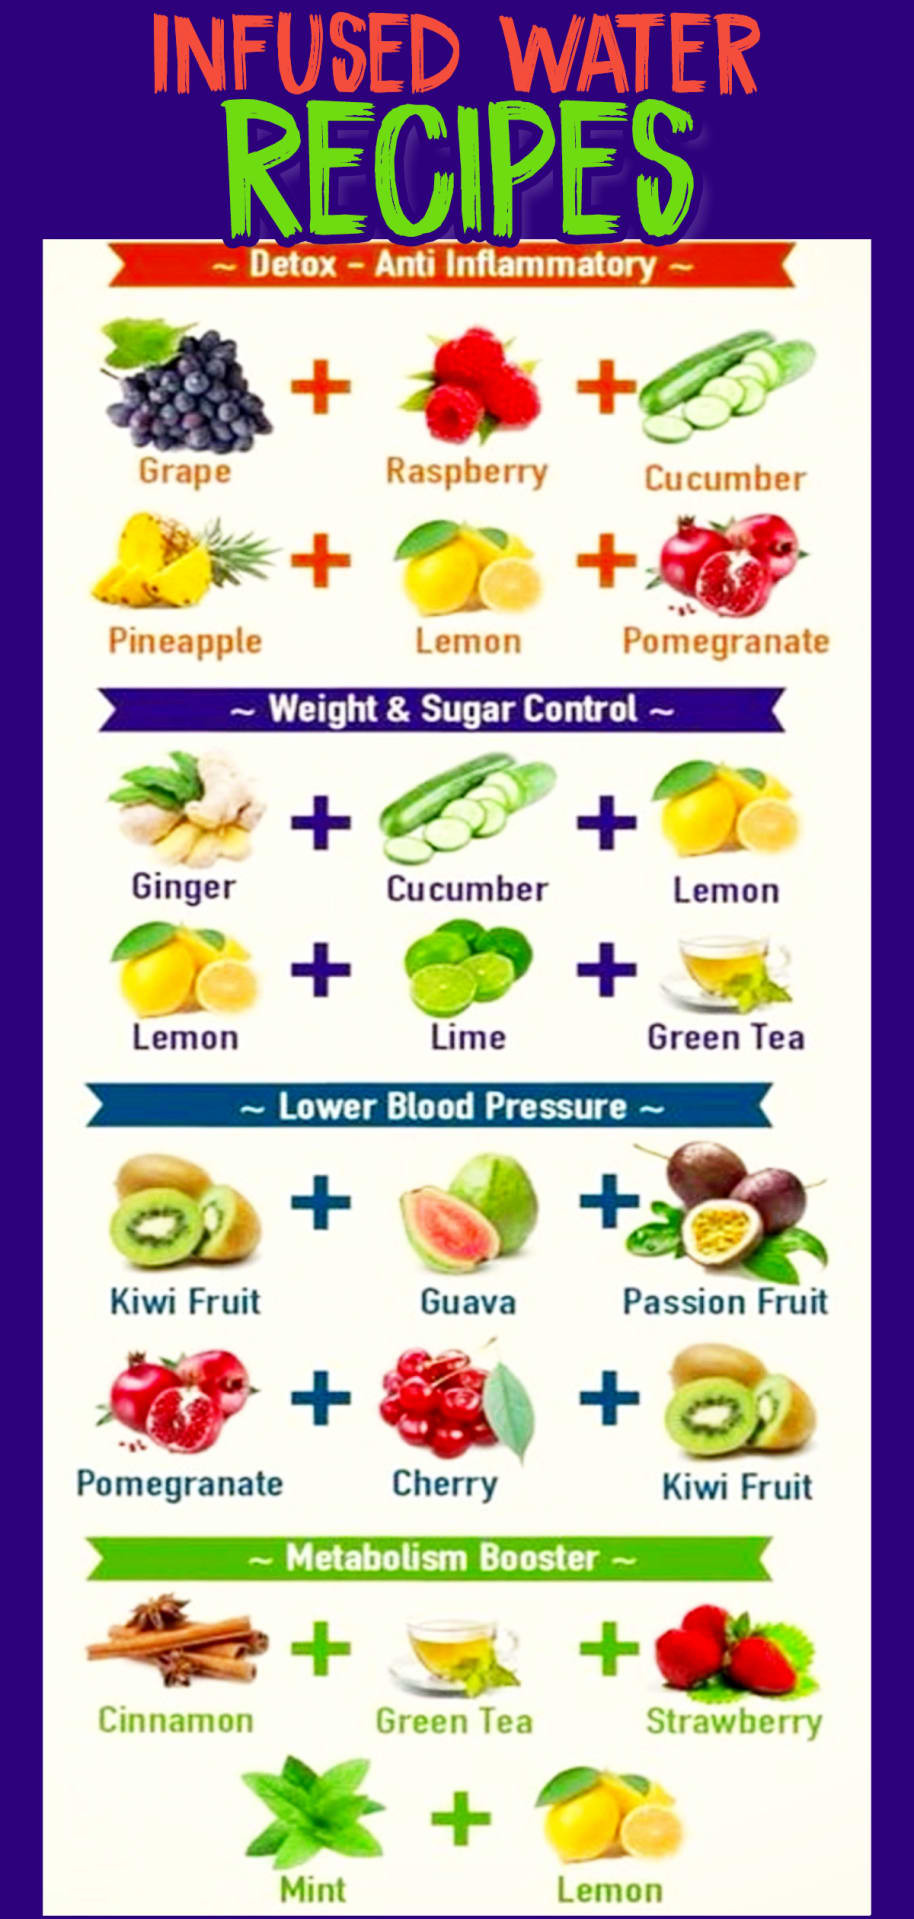 Flavored Water Recipes For Weight Loss
 Infused Water Recipes and Benefits How To Make Fruit